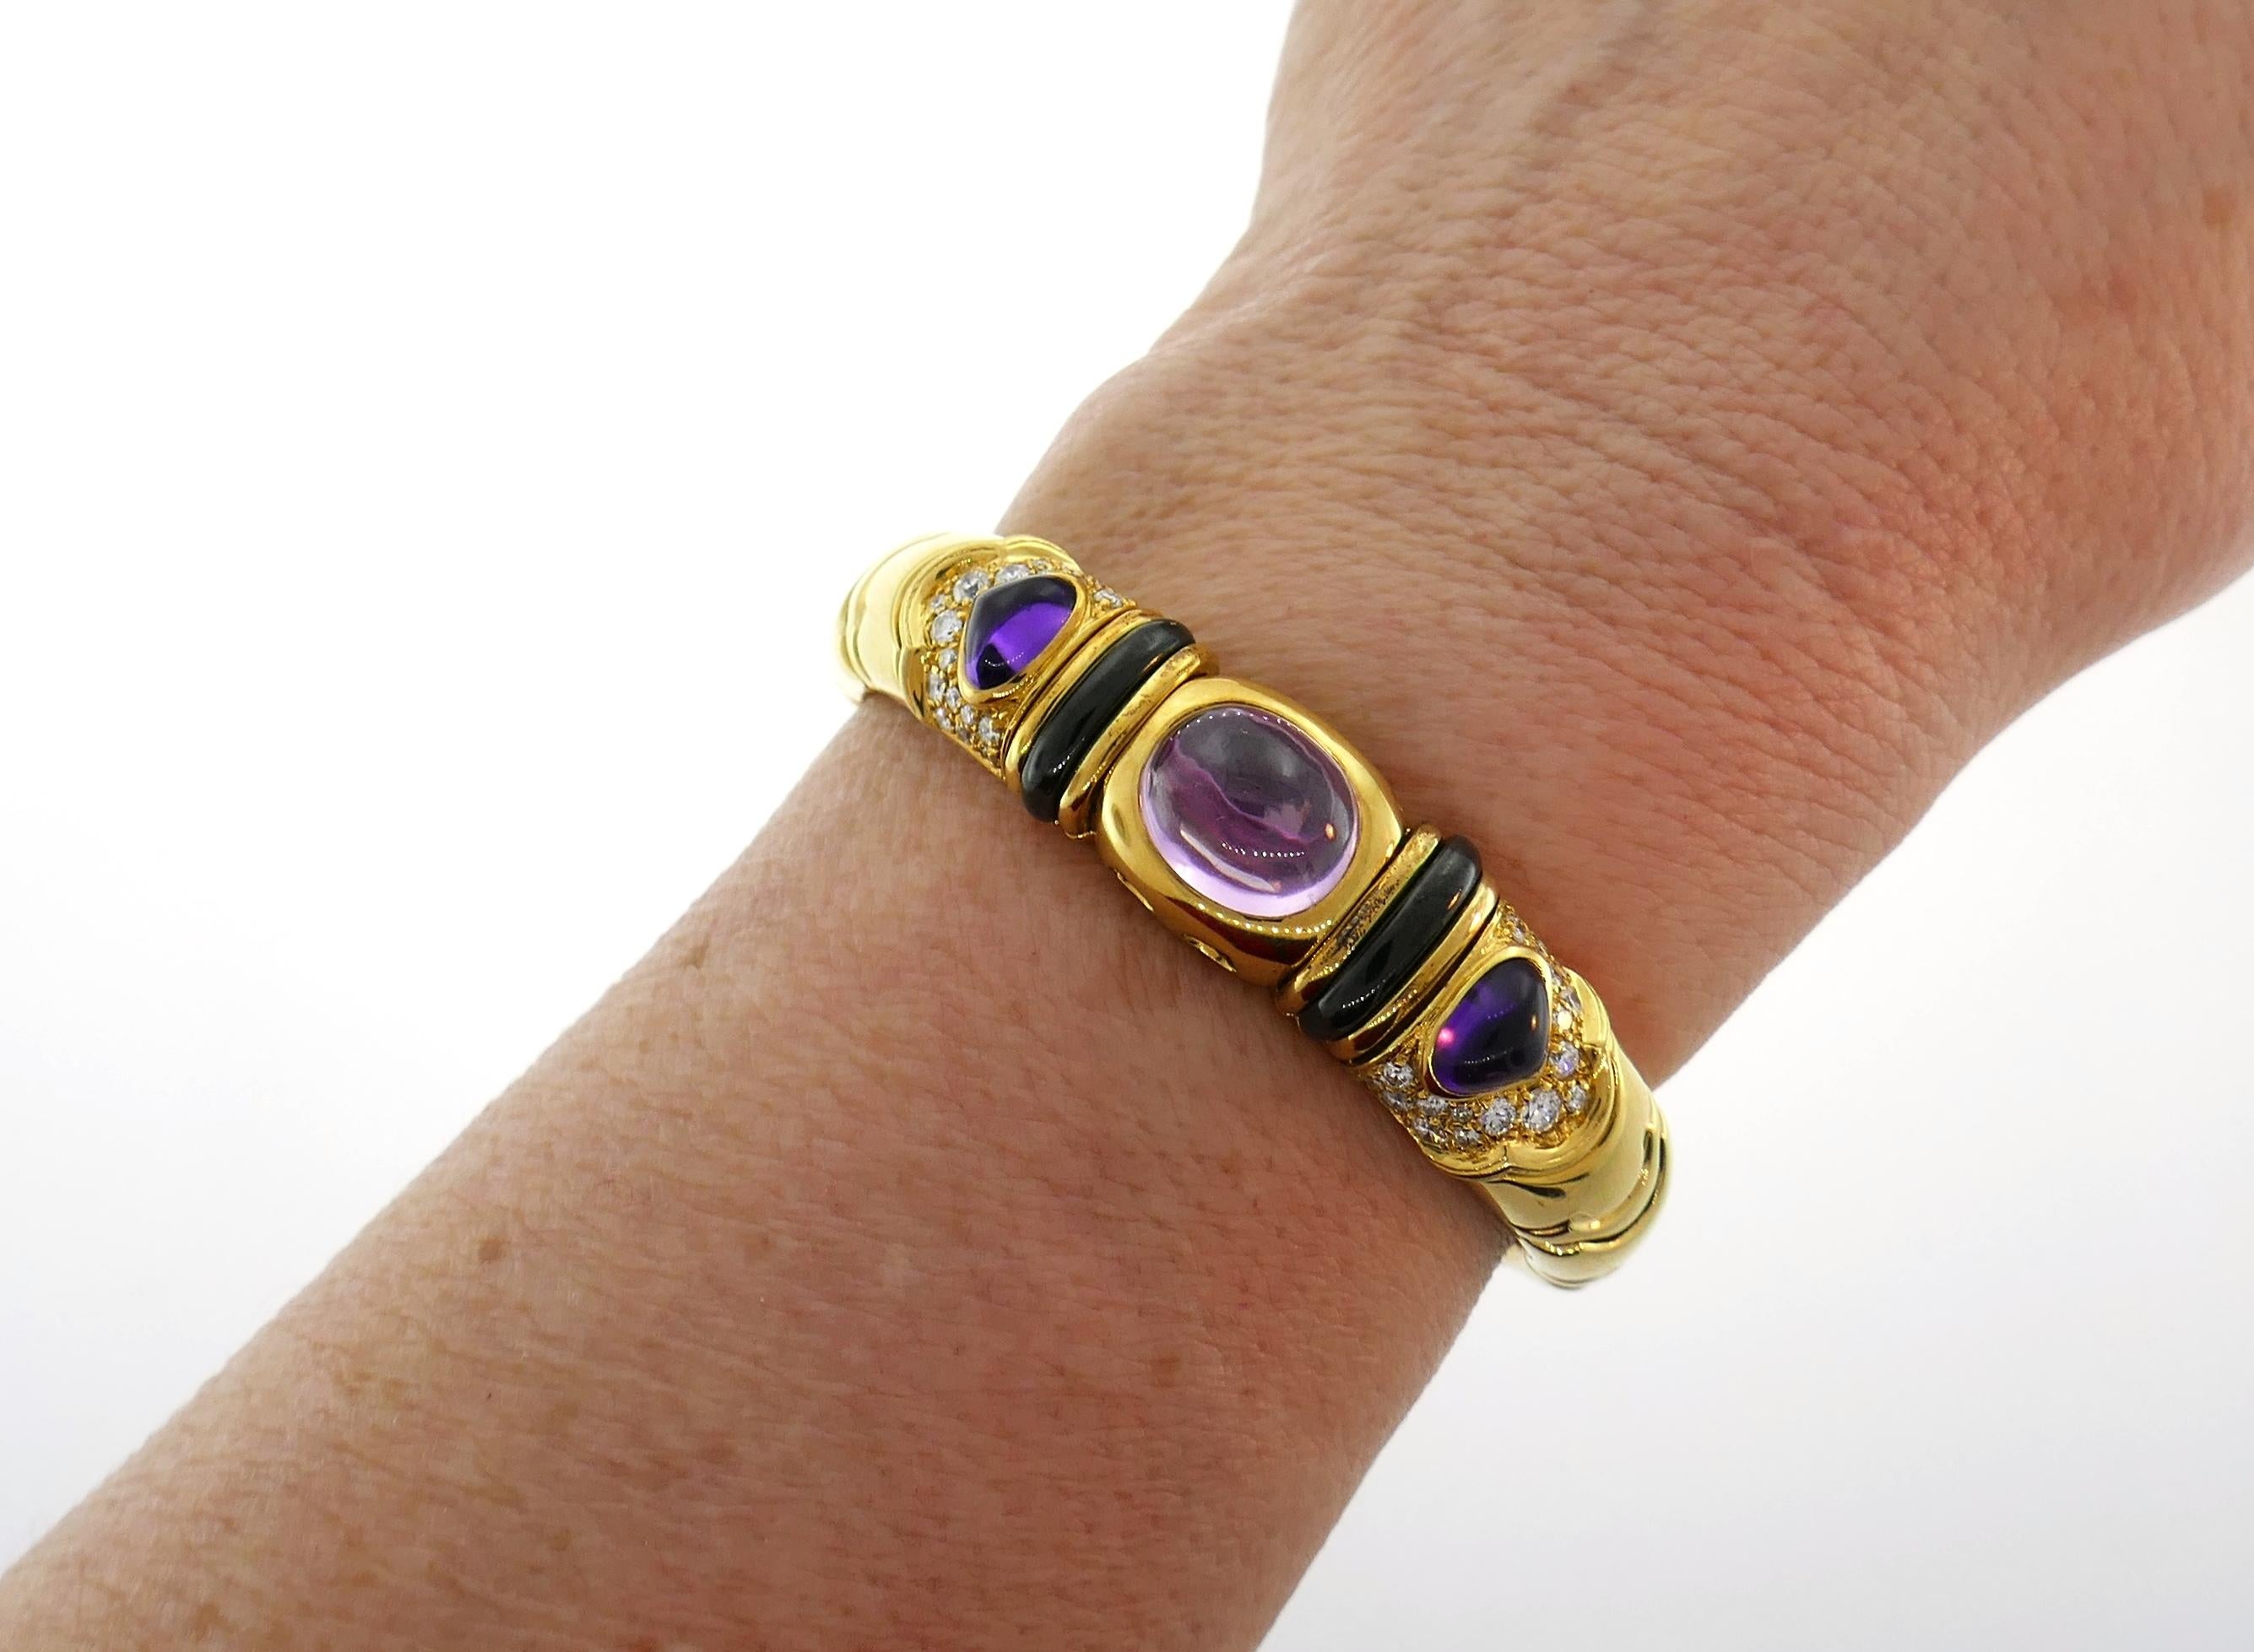 Colorful and chic bangle created by Marina B in 1980s. Elegant and wearable, the bracelet is a great addition to your jewelry collection. Features an oval cabochon pink tourmaline set in 18 karat yellow gold accented on each side with a pear